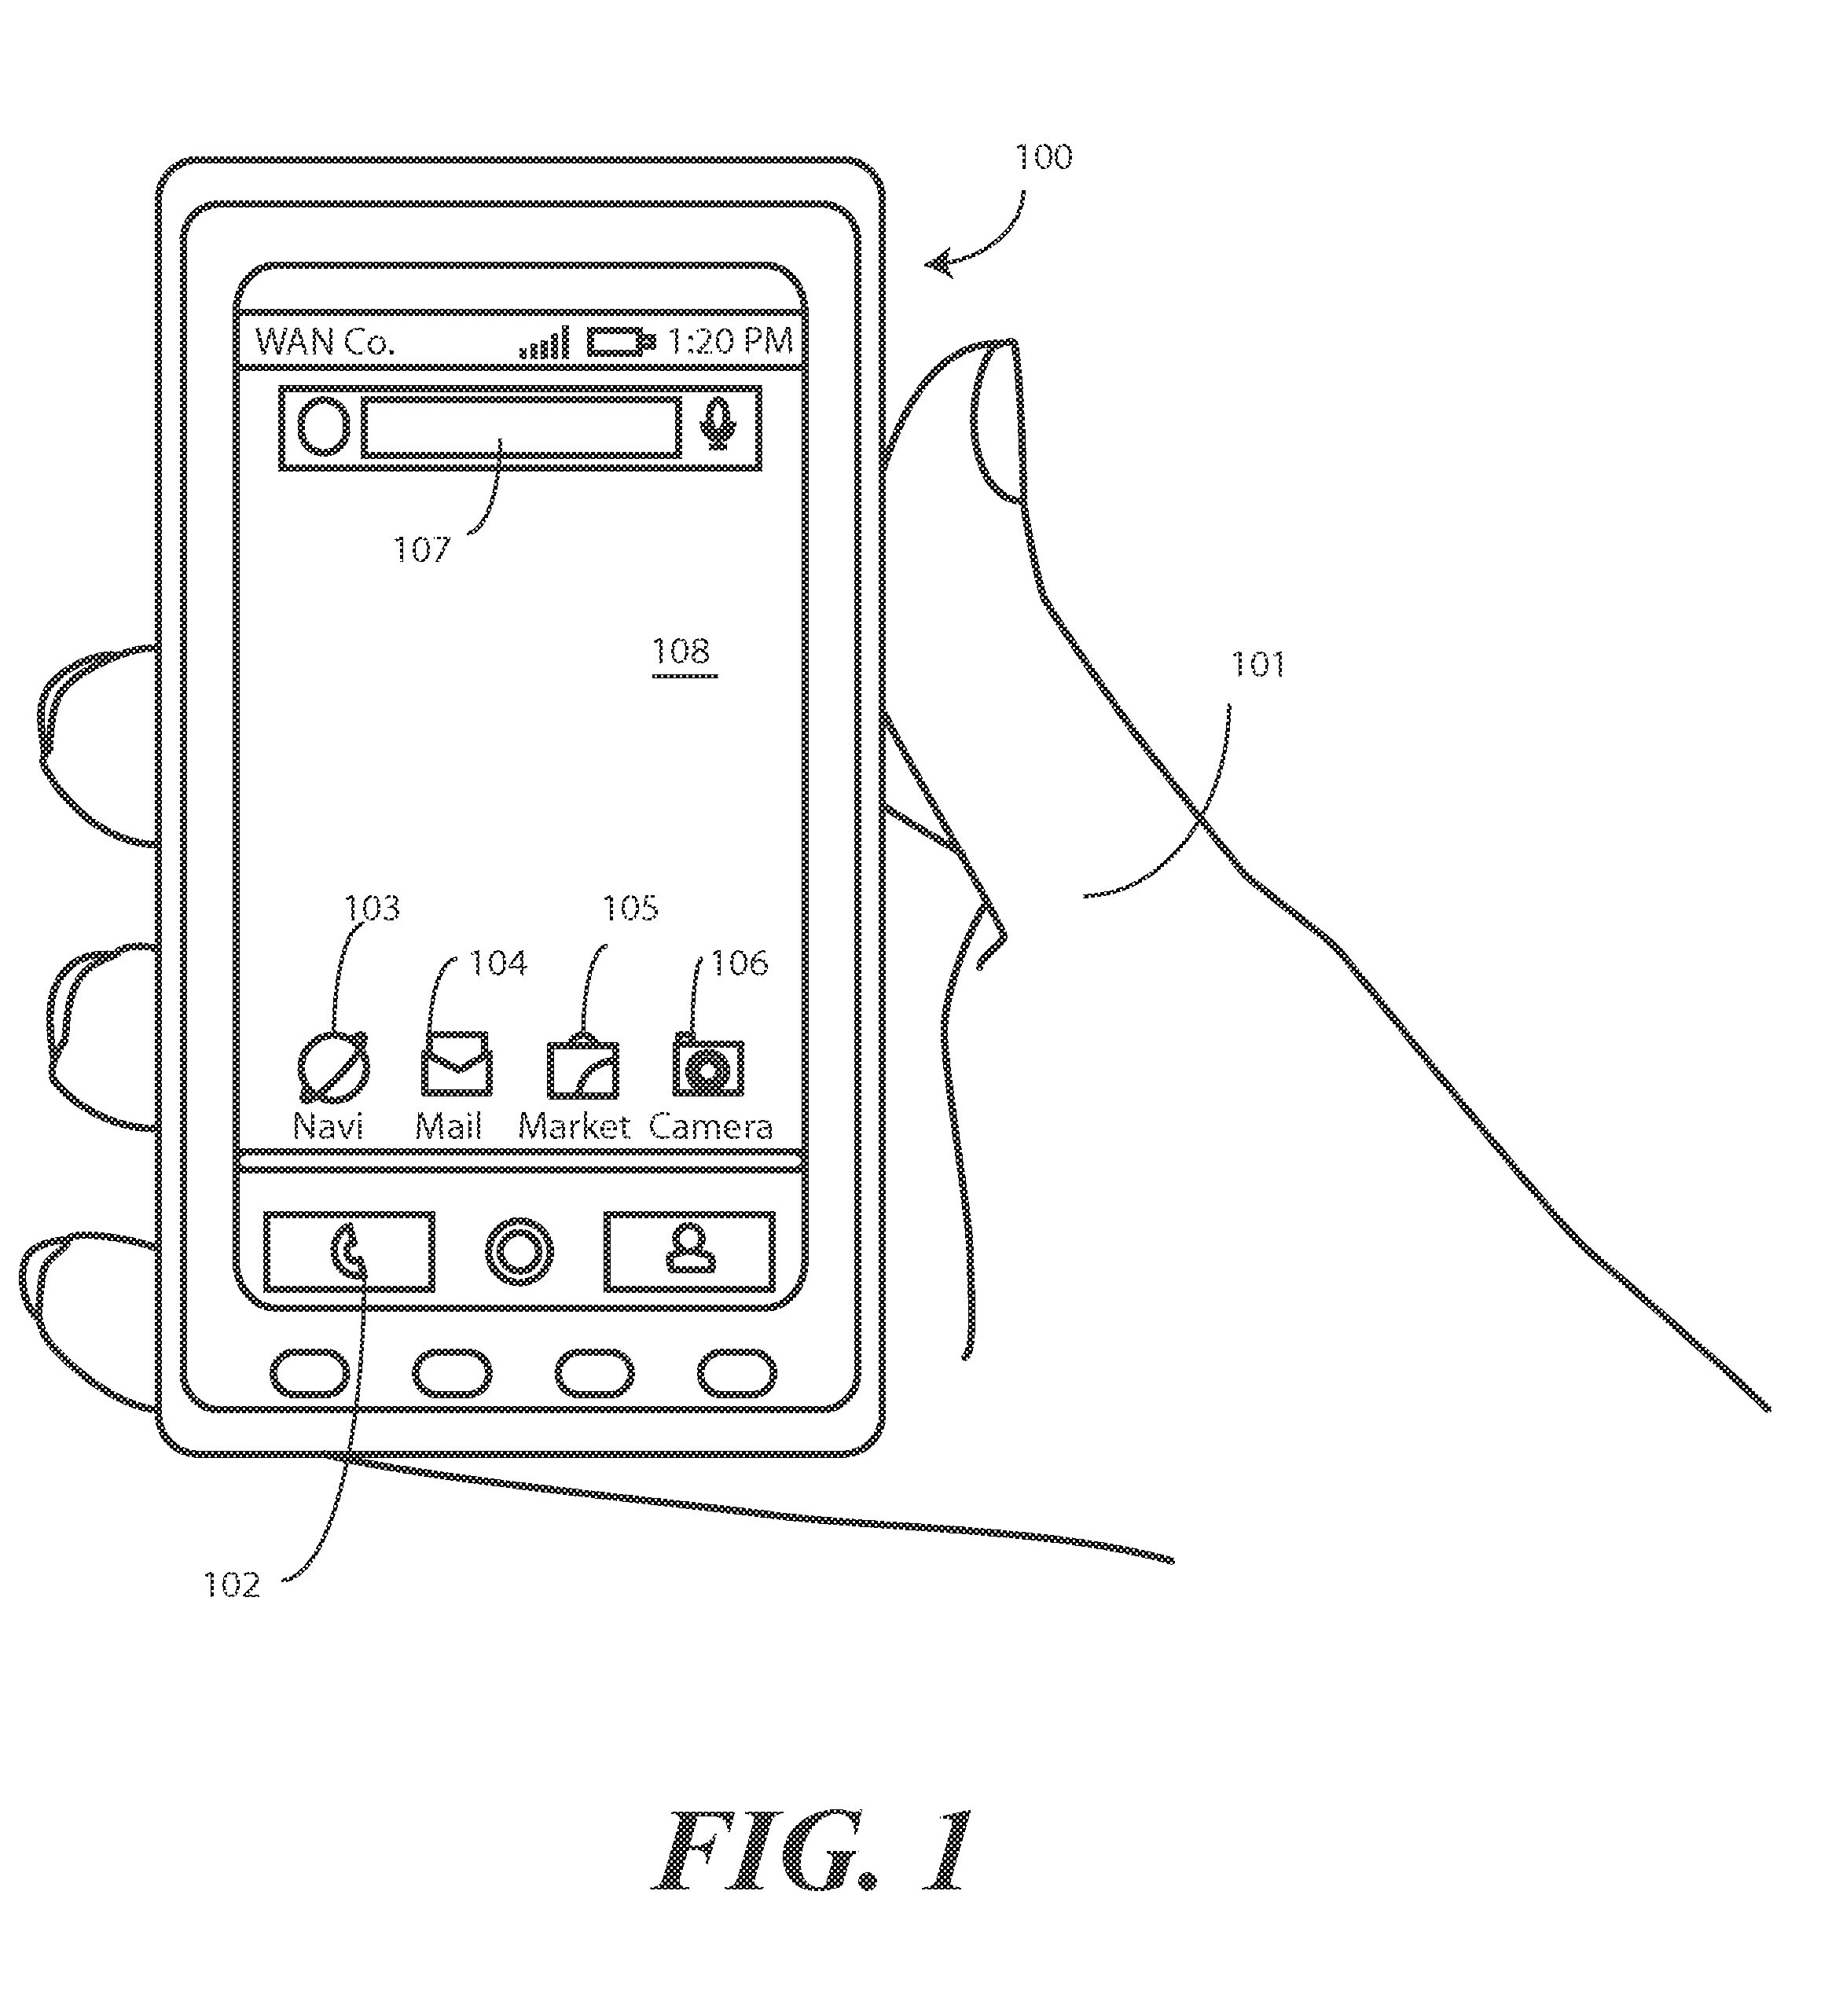 Method and device for detecting display damage and reconfiguring presentation data and actuation elements